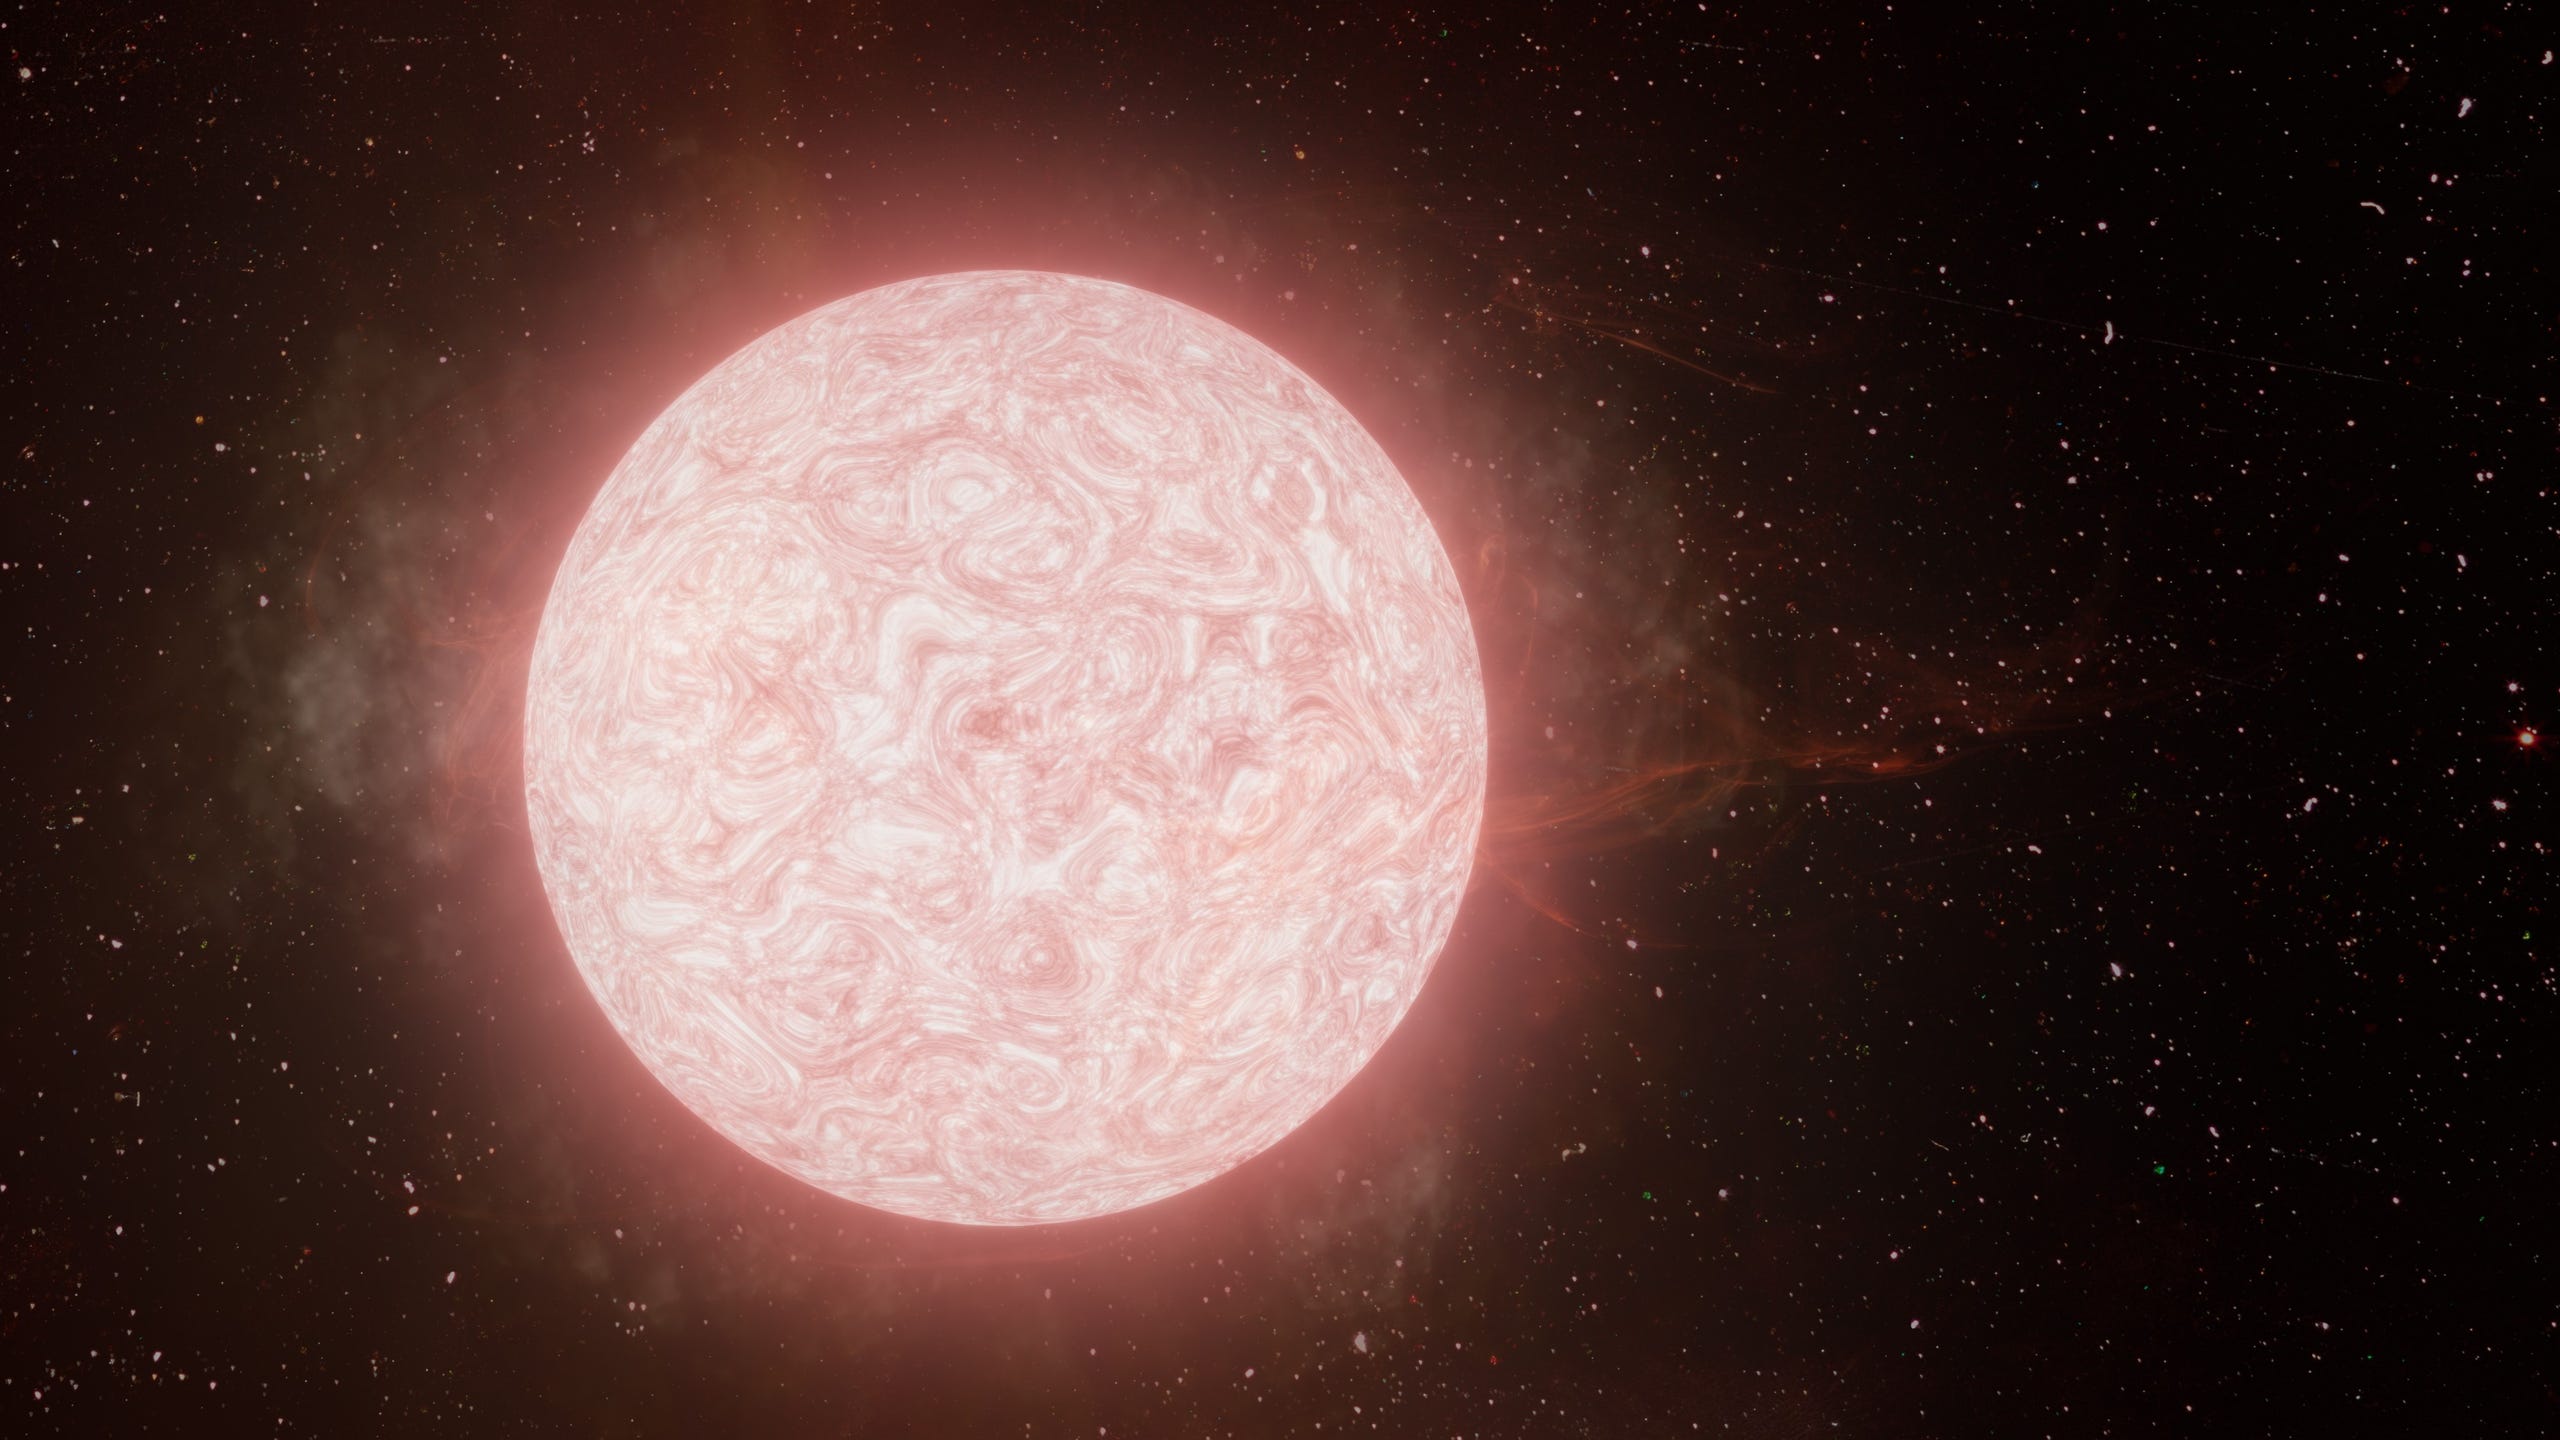 An artist’s impression of a red supergiant star in the final year of its life emitting a tumultuous cloud of gas. This suggests at least some of these stars undergo significant internal changes before going supernova.